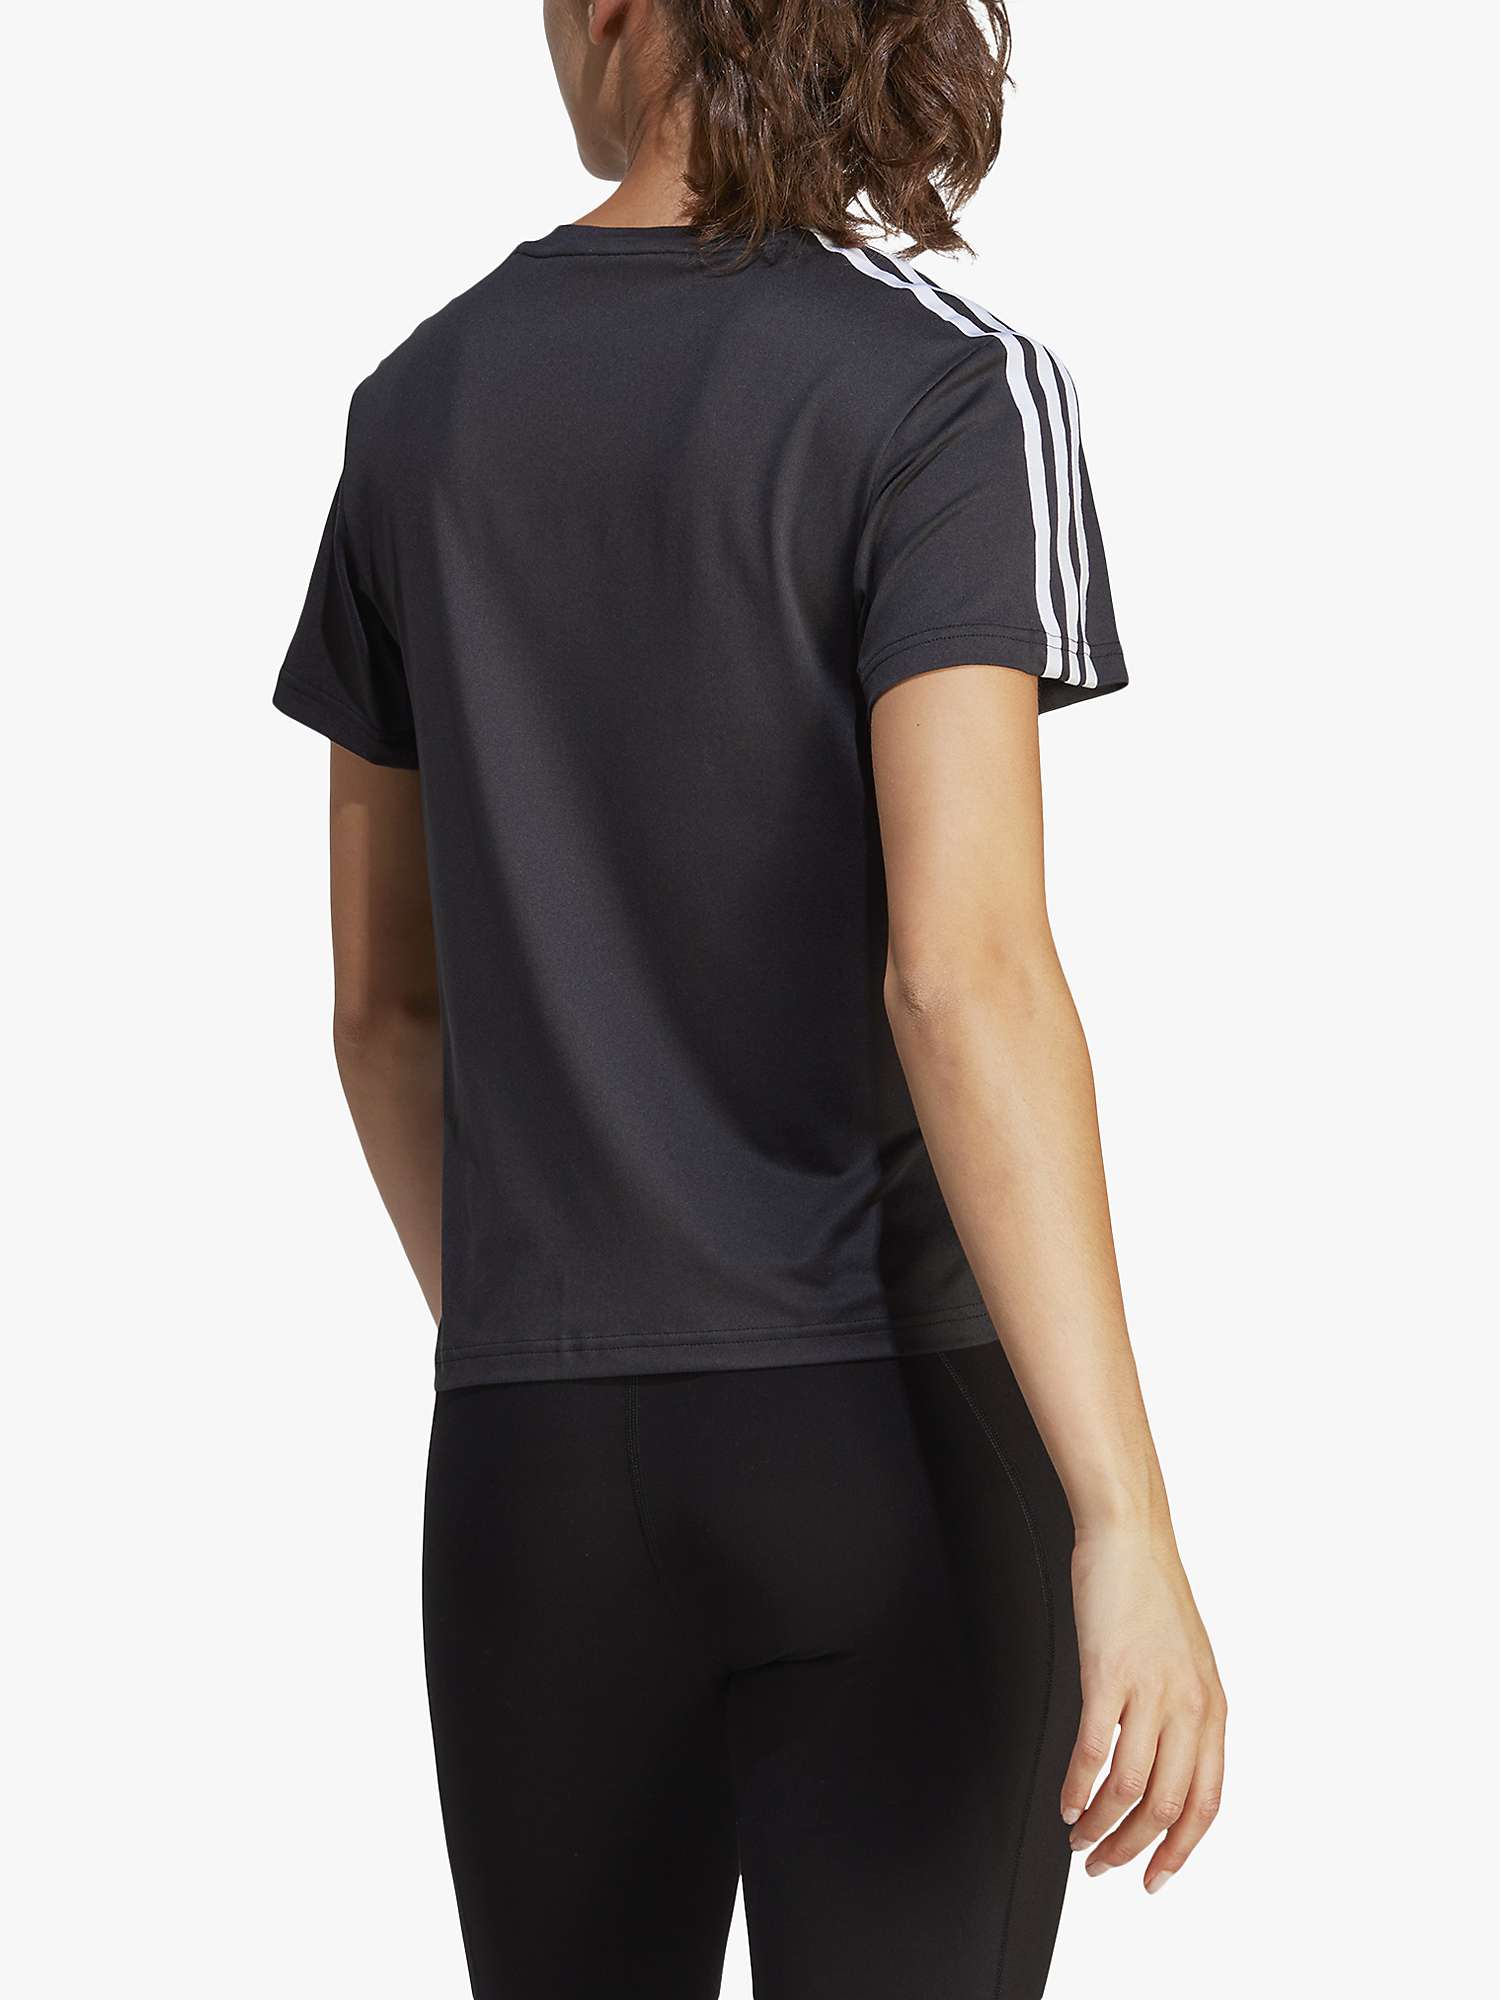 Buy adidas Train Essentials 3-Stripes Recycled Gym Top Online at johnlewis.com